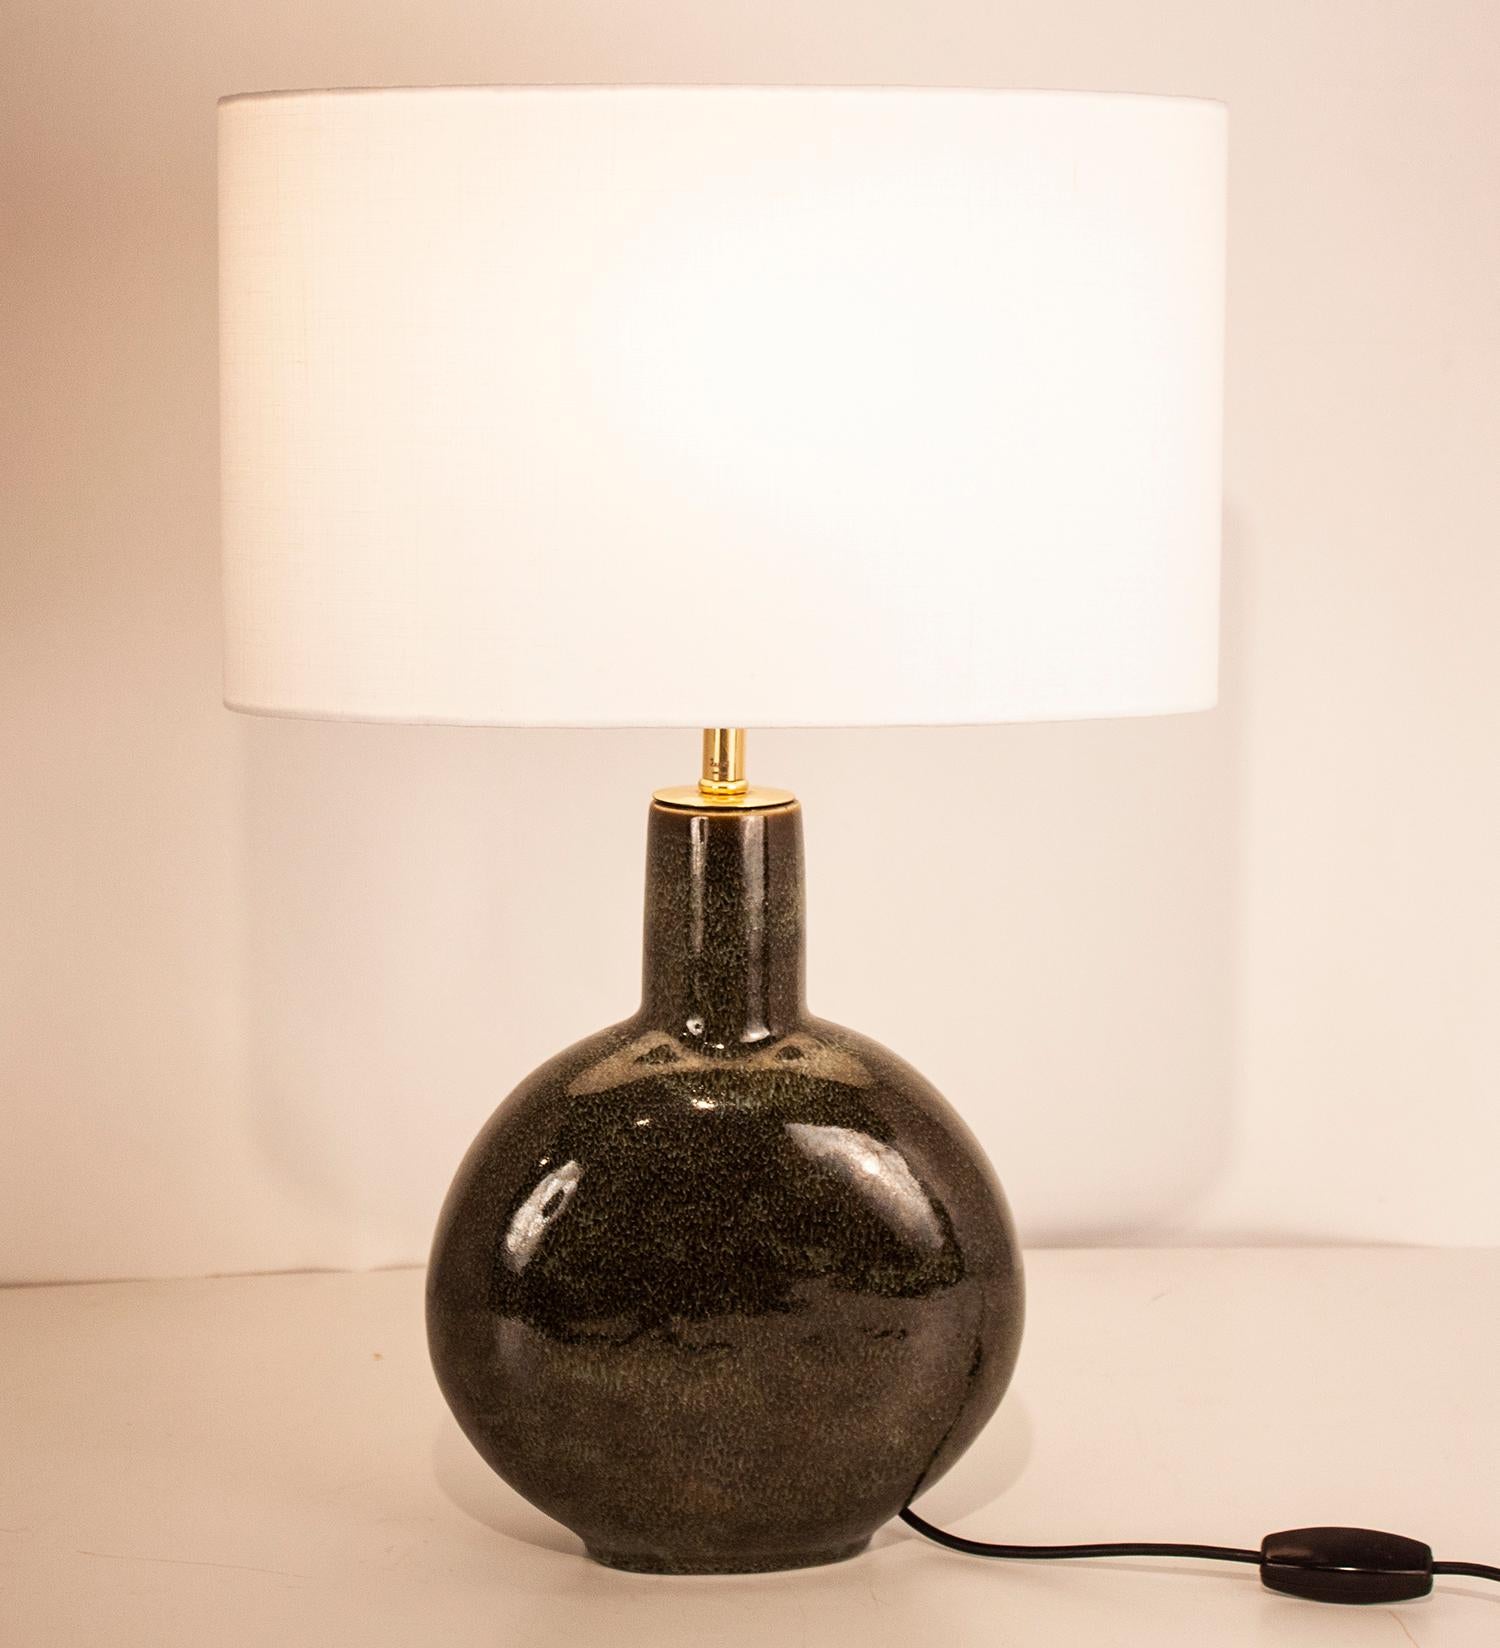 Spanish Mid-century Modern, Green Ceramic and Brass Table Lamp by Valenti, Spain 1970s For Sale